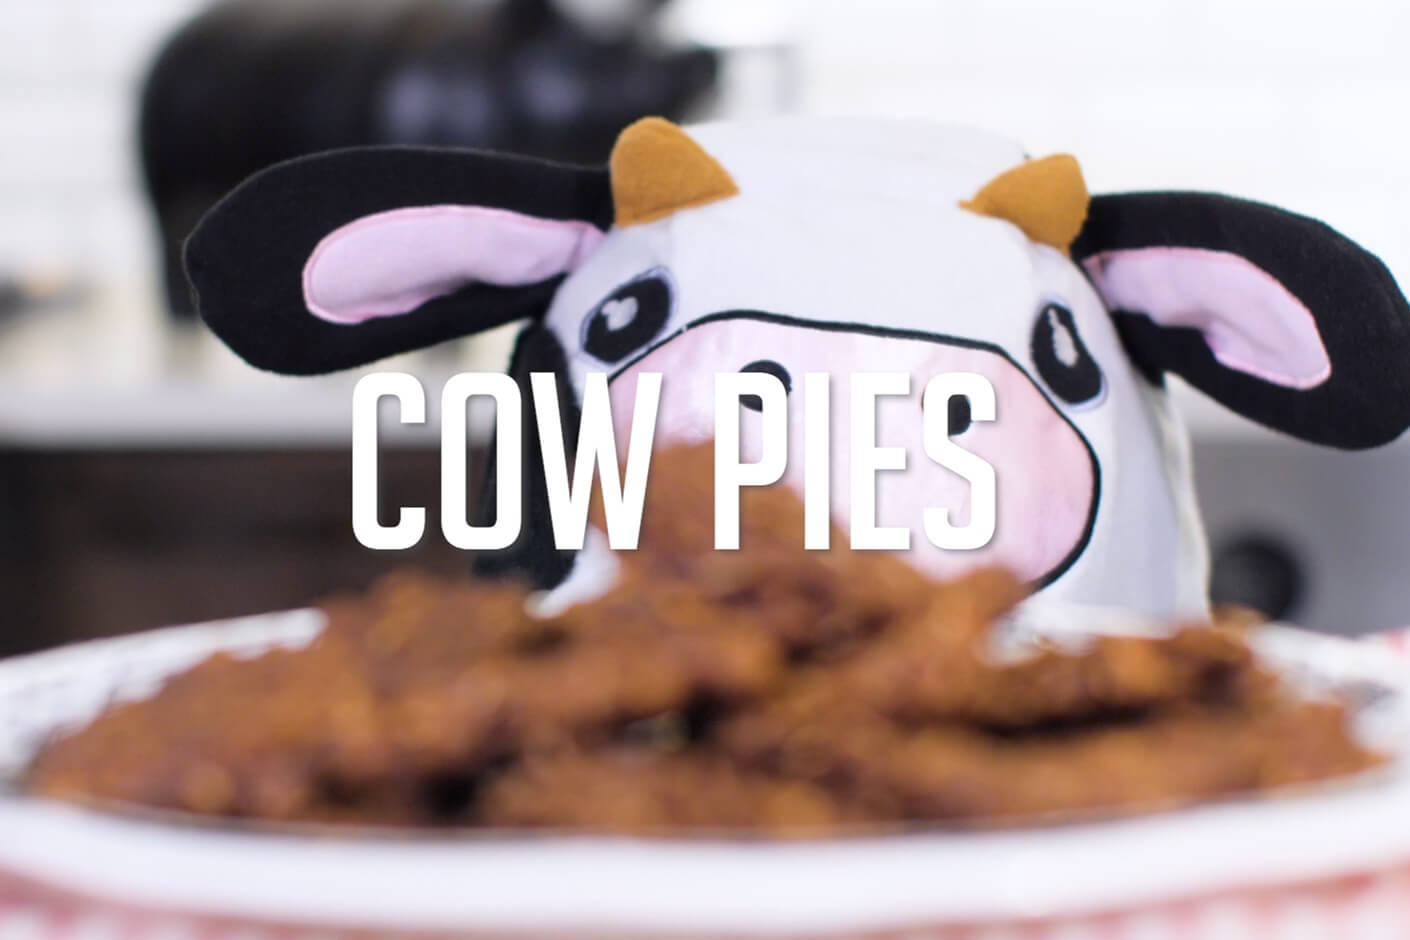 Cow Pies